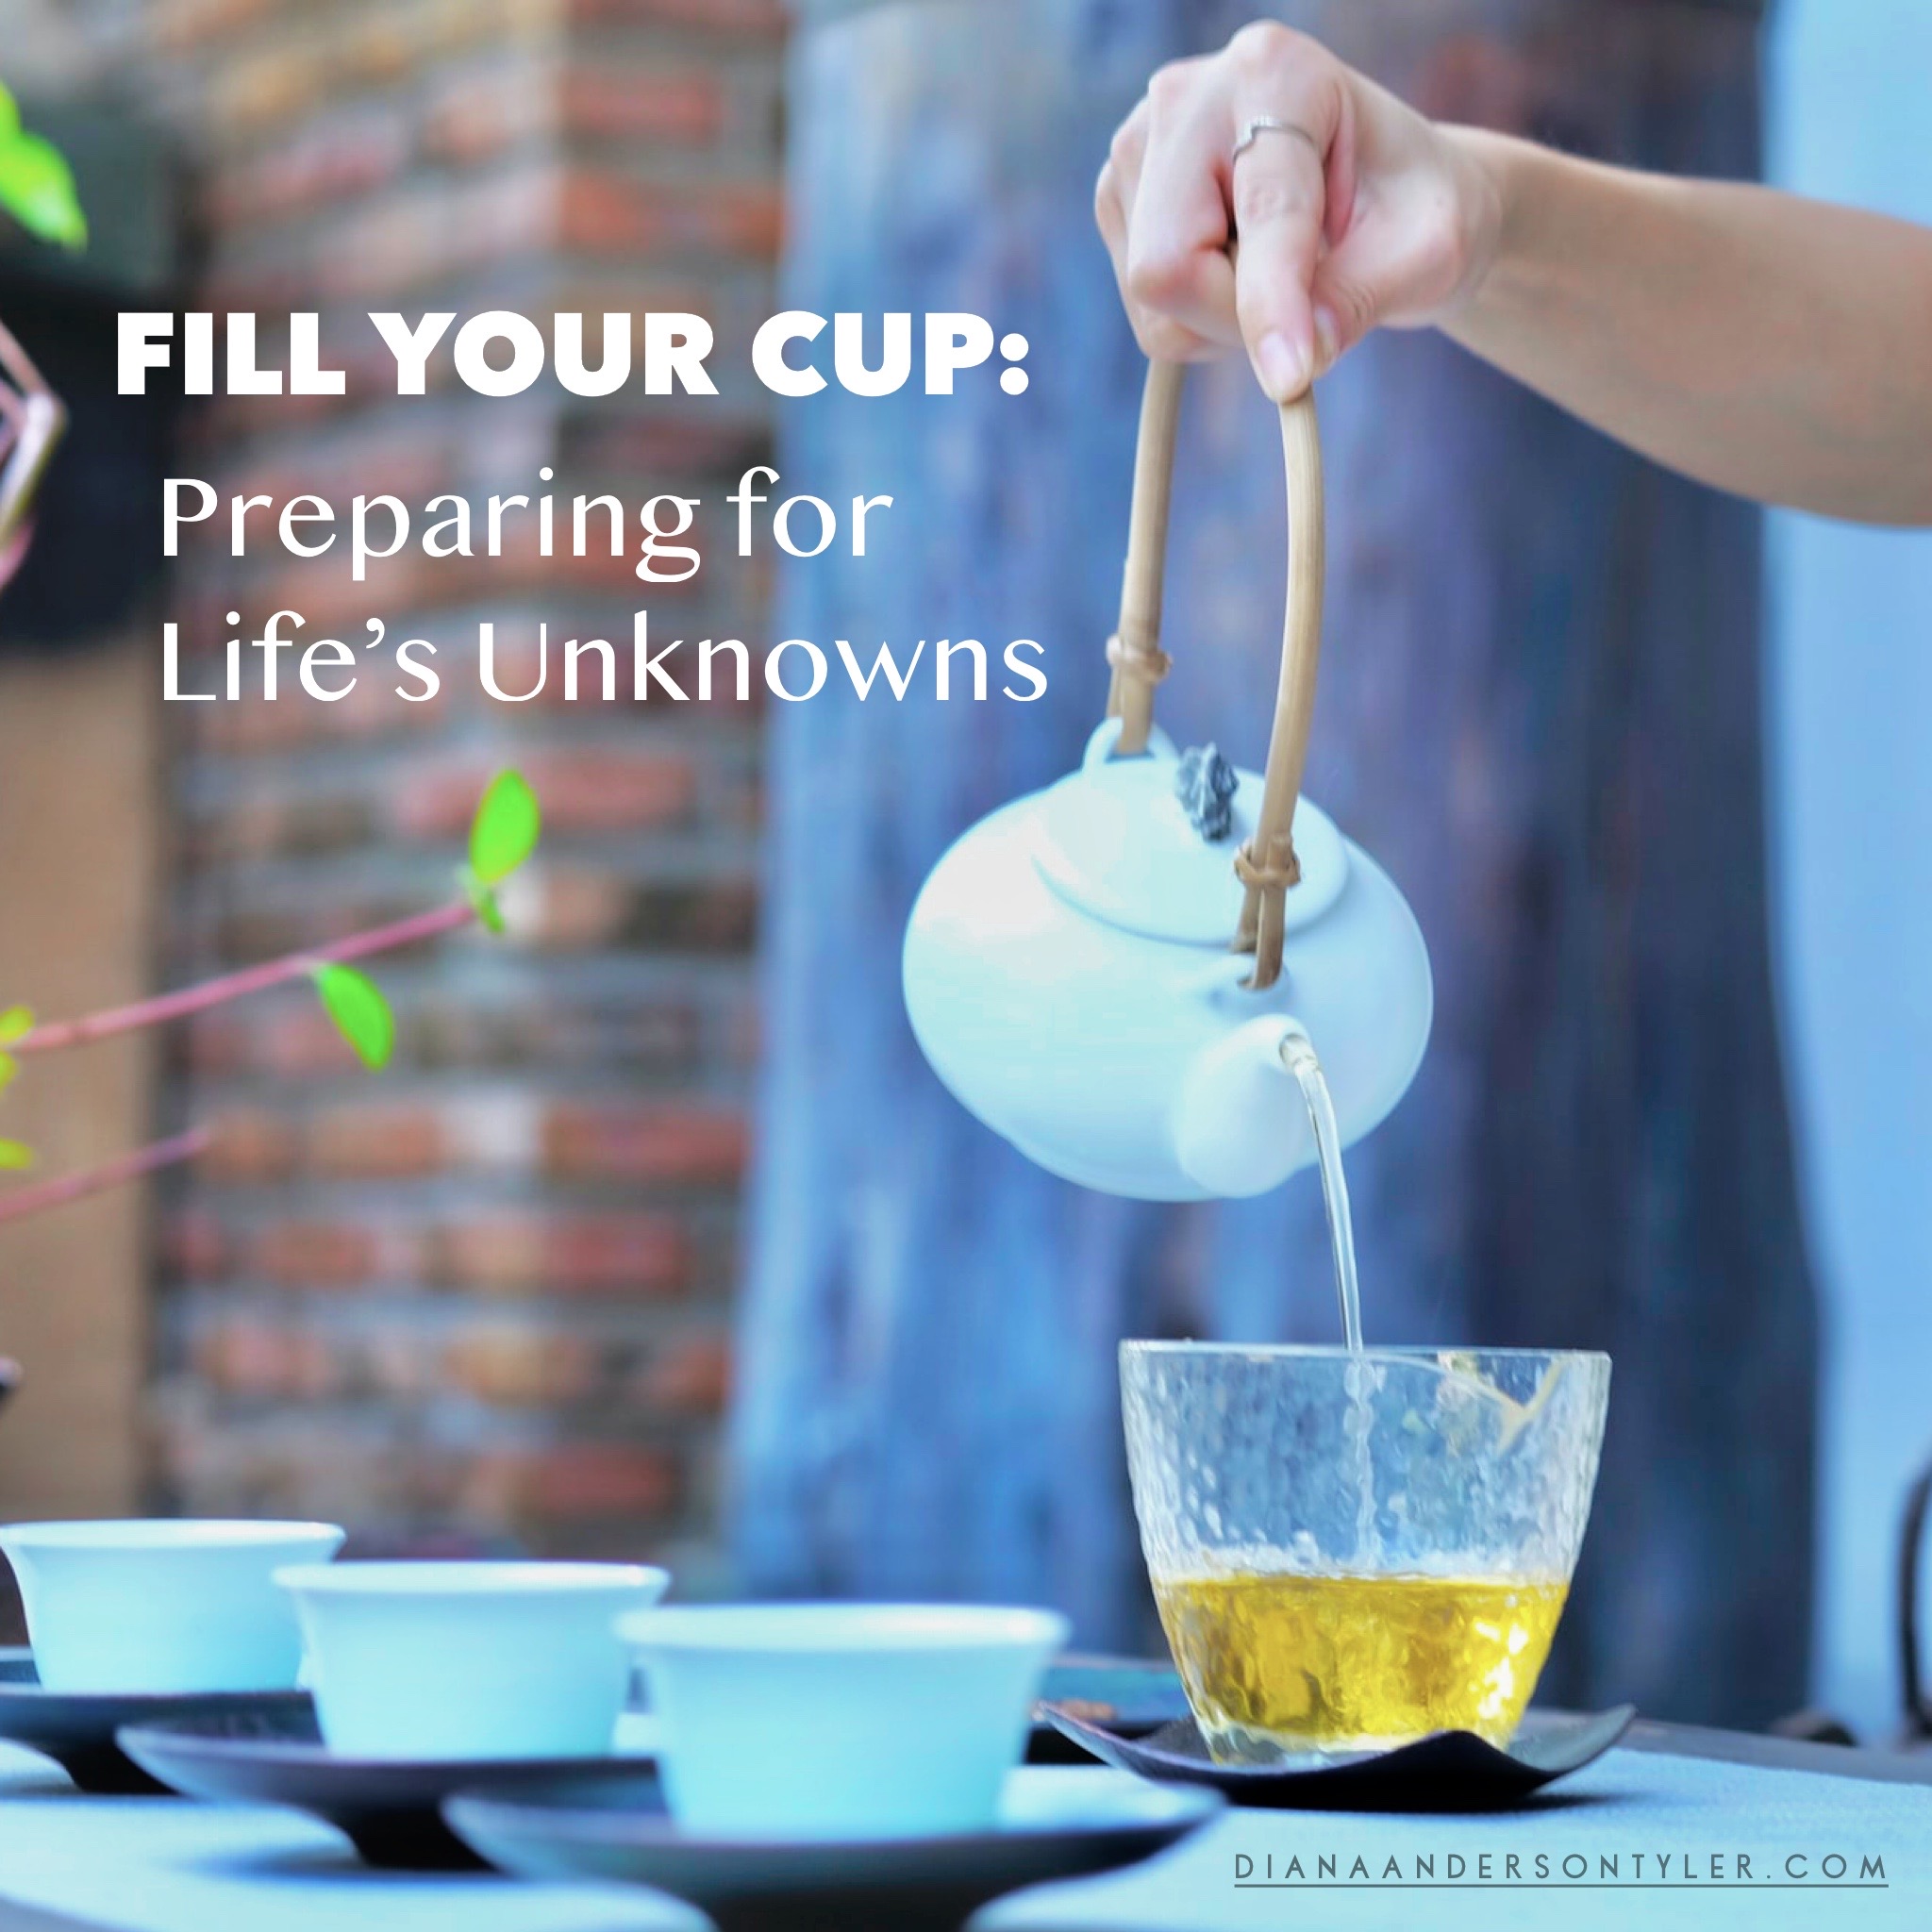 Fill Your Cup: Preparing for Life's Unknowns